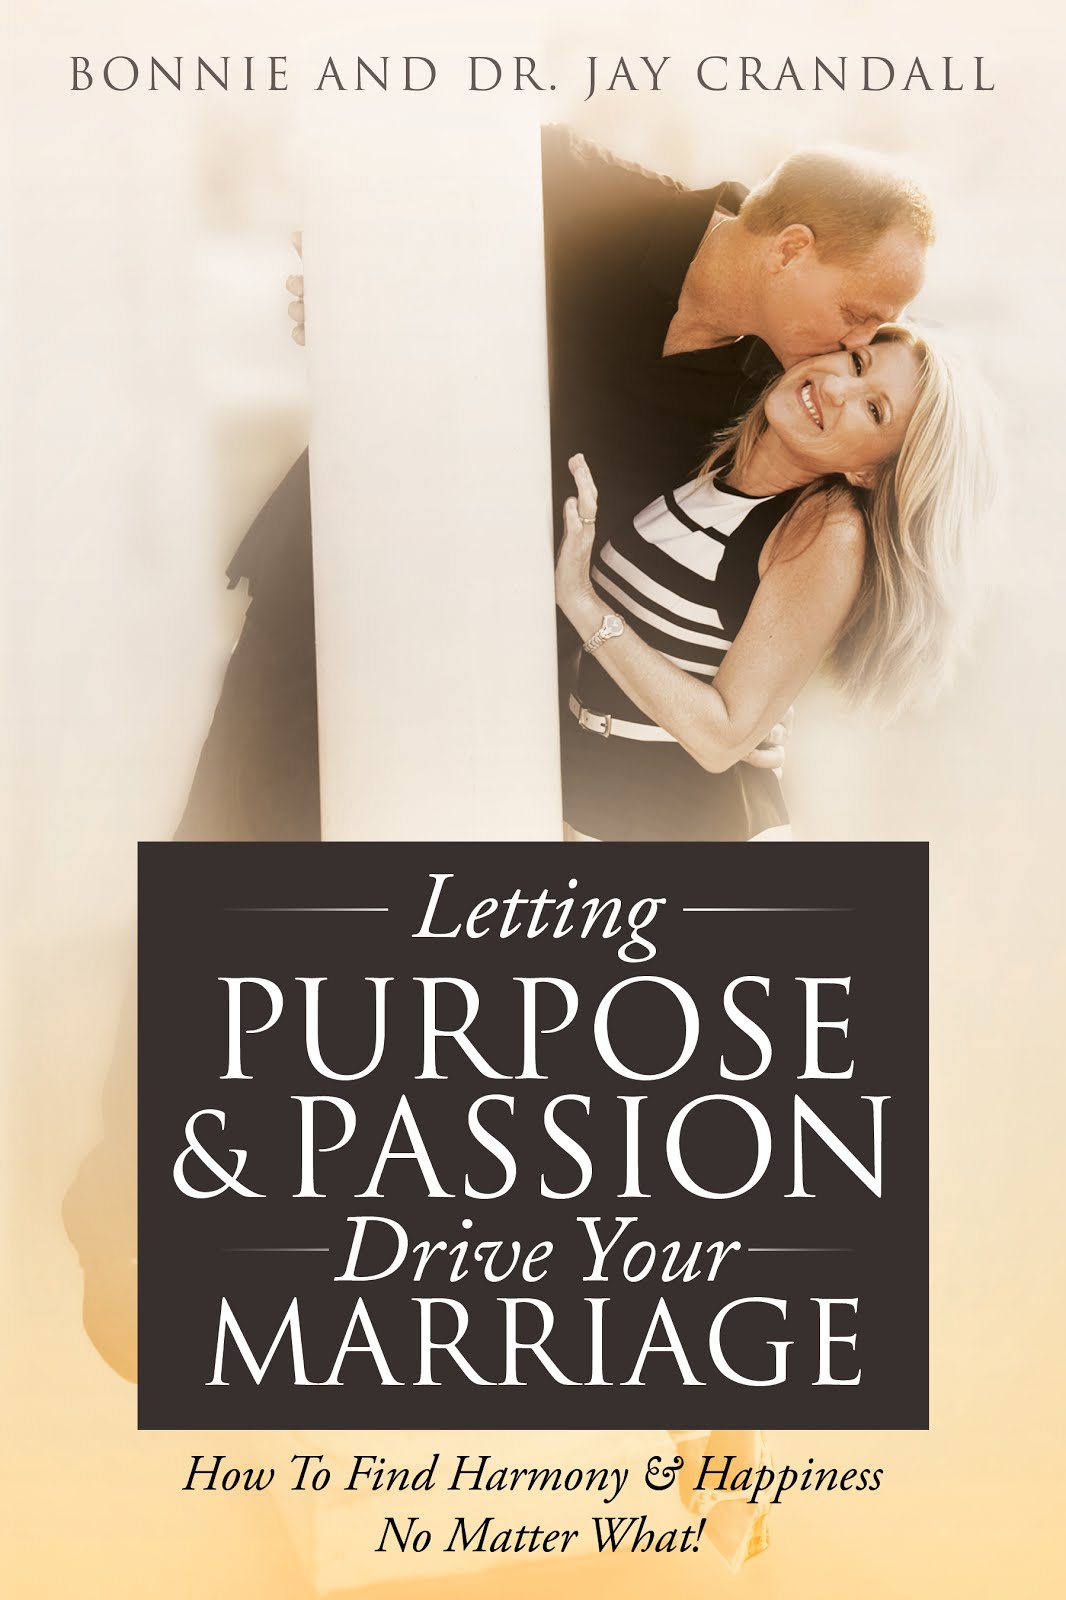 Letting Purpose & Passion Drive Your Marriage